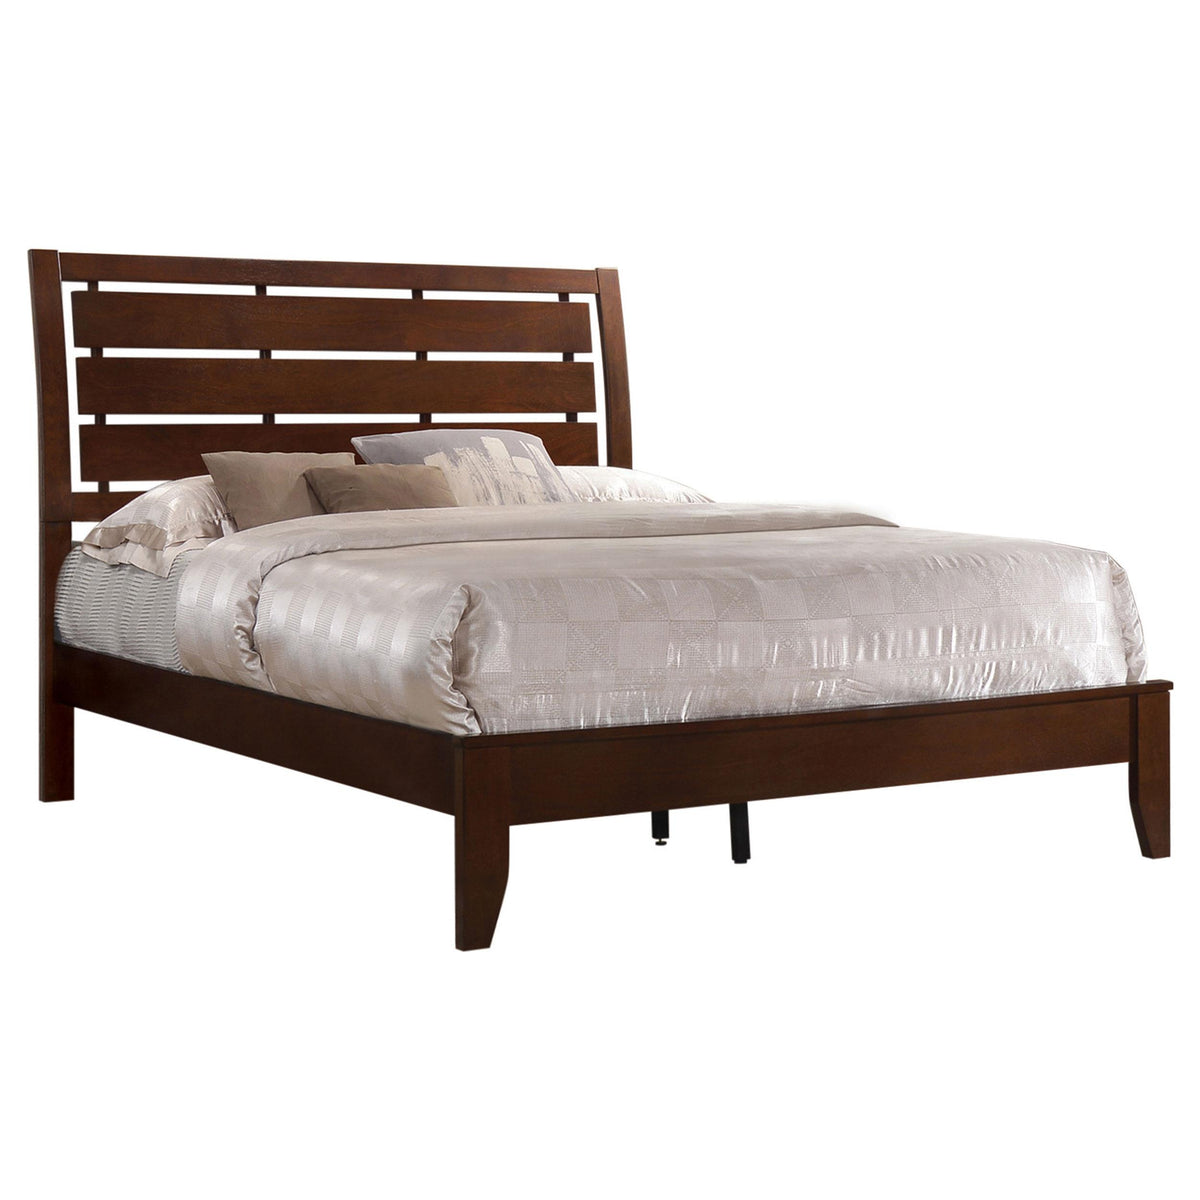 Serenity Full Panel Bed with Cut-out Headboard Rich Merlot Serenity Full Panel Bed with Cut-out Headboard Rich Merlot Half Price Furniture